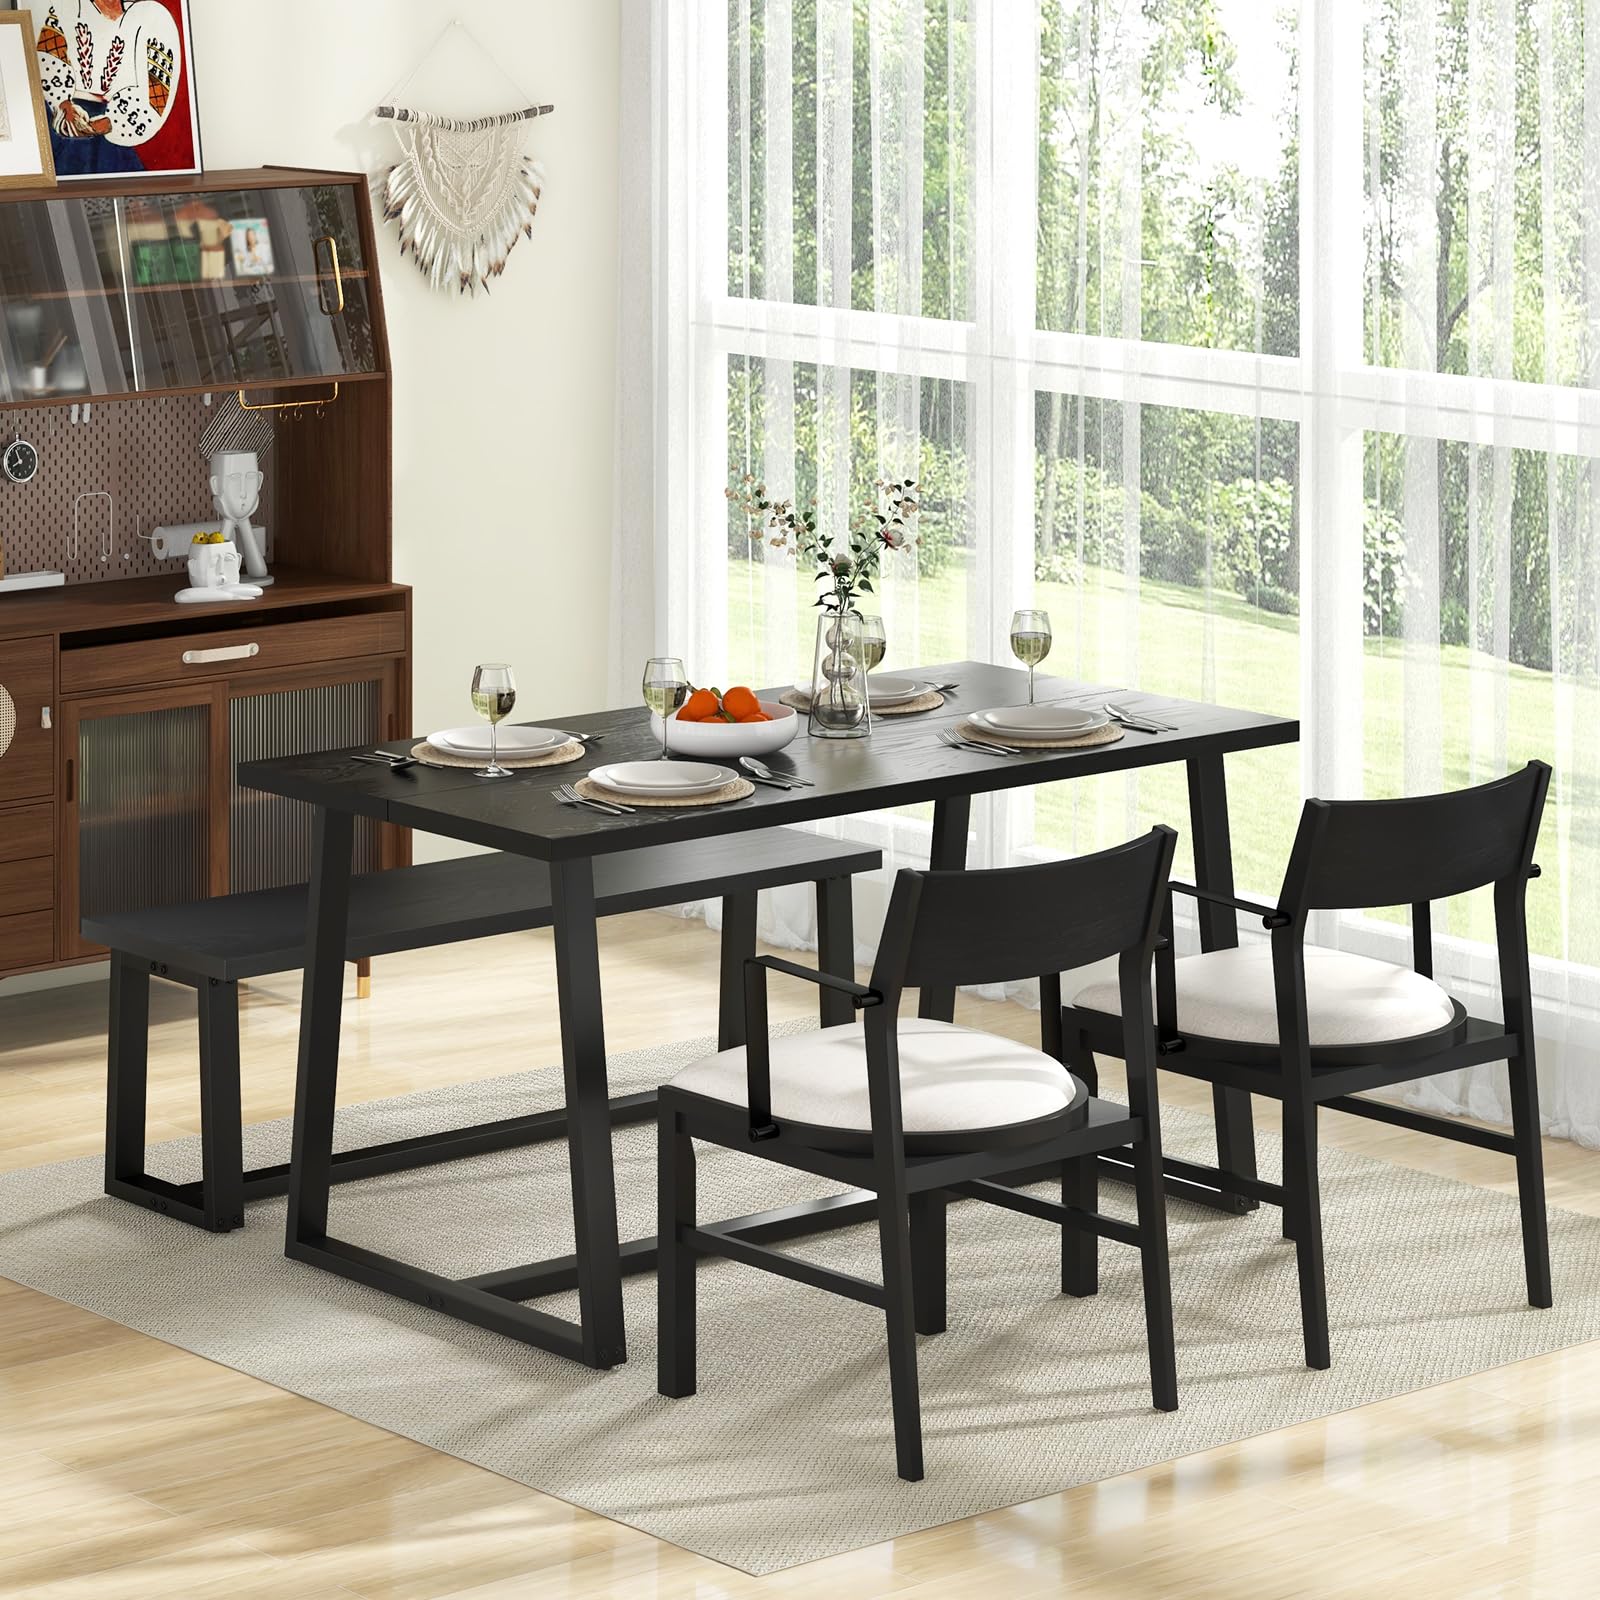 Giantex Dining Room Table Set for 4 - Kitchen Table Chairs Set with 2 Armchairs, 1 Bench, Dinette Set with Cushions